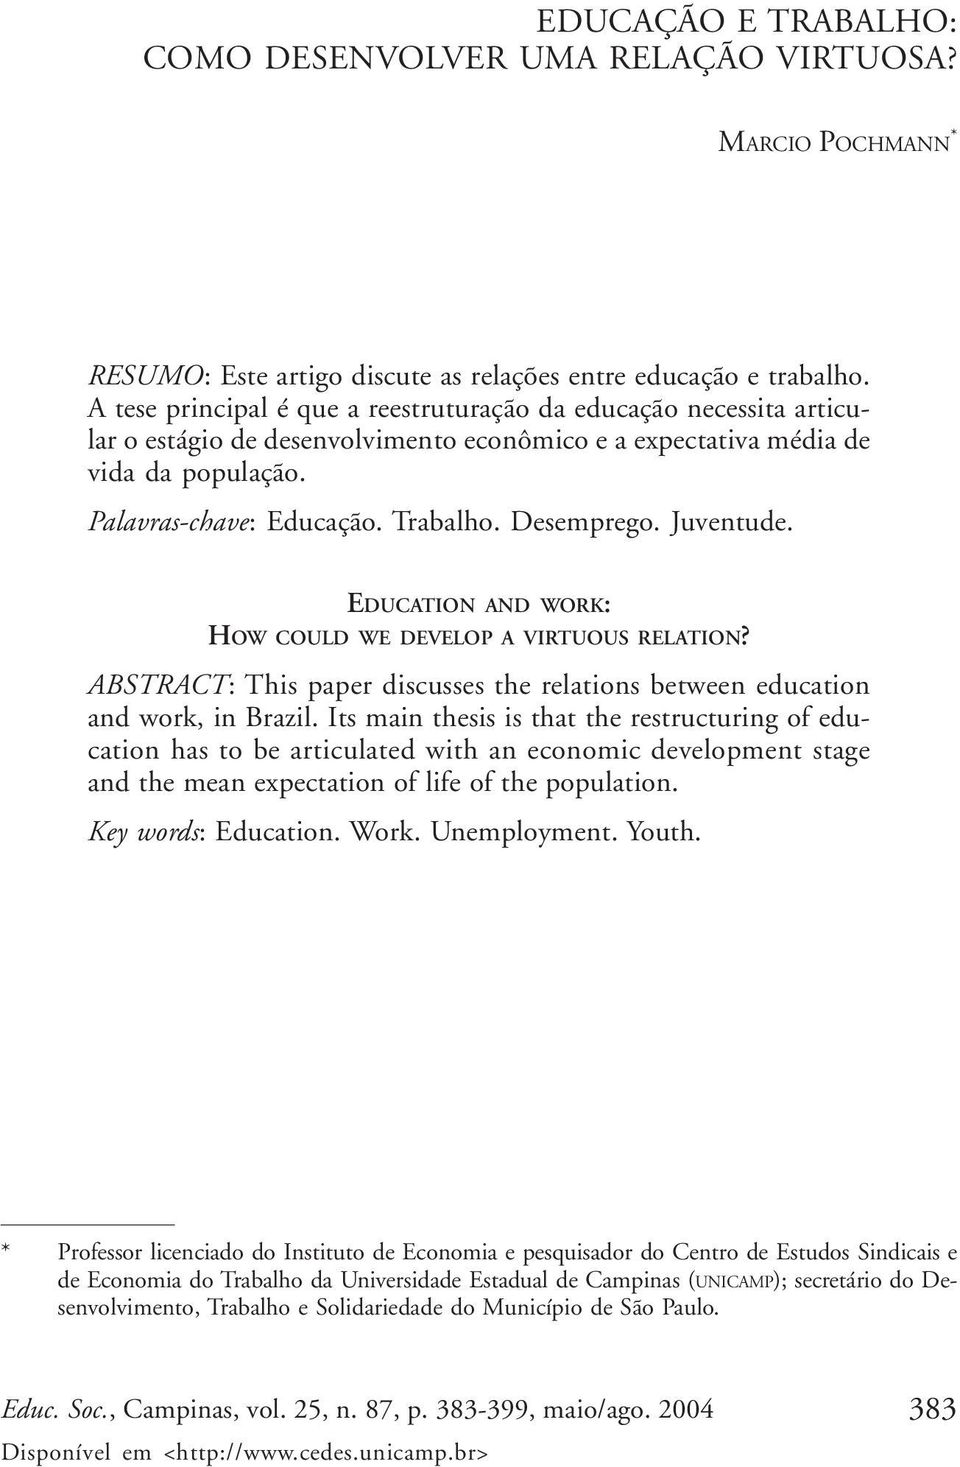 Desemprego. Juventude. EDUCATION AND WORK: HOW COULD WE DEVELOP A VIRTUOUS RELATION? ABSTRACT: This paper discusses the relations between education and work, in Brazil.